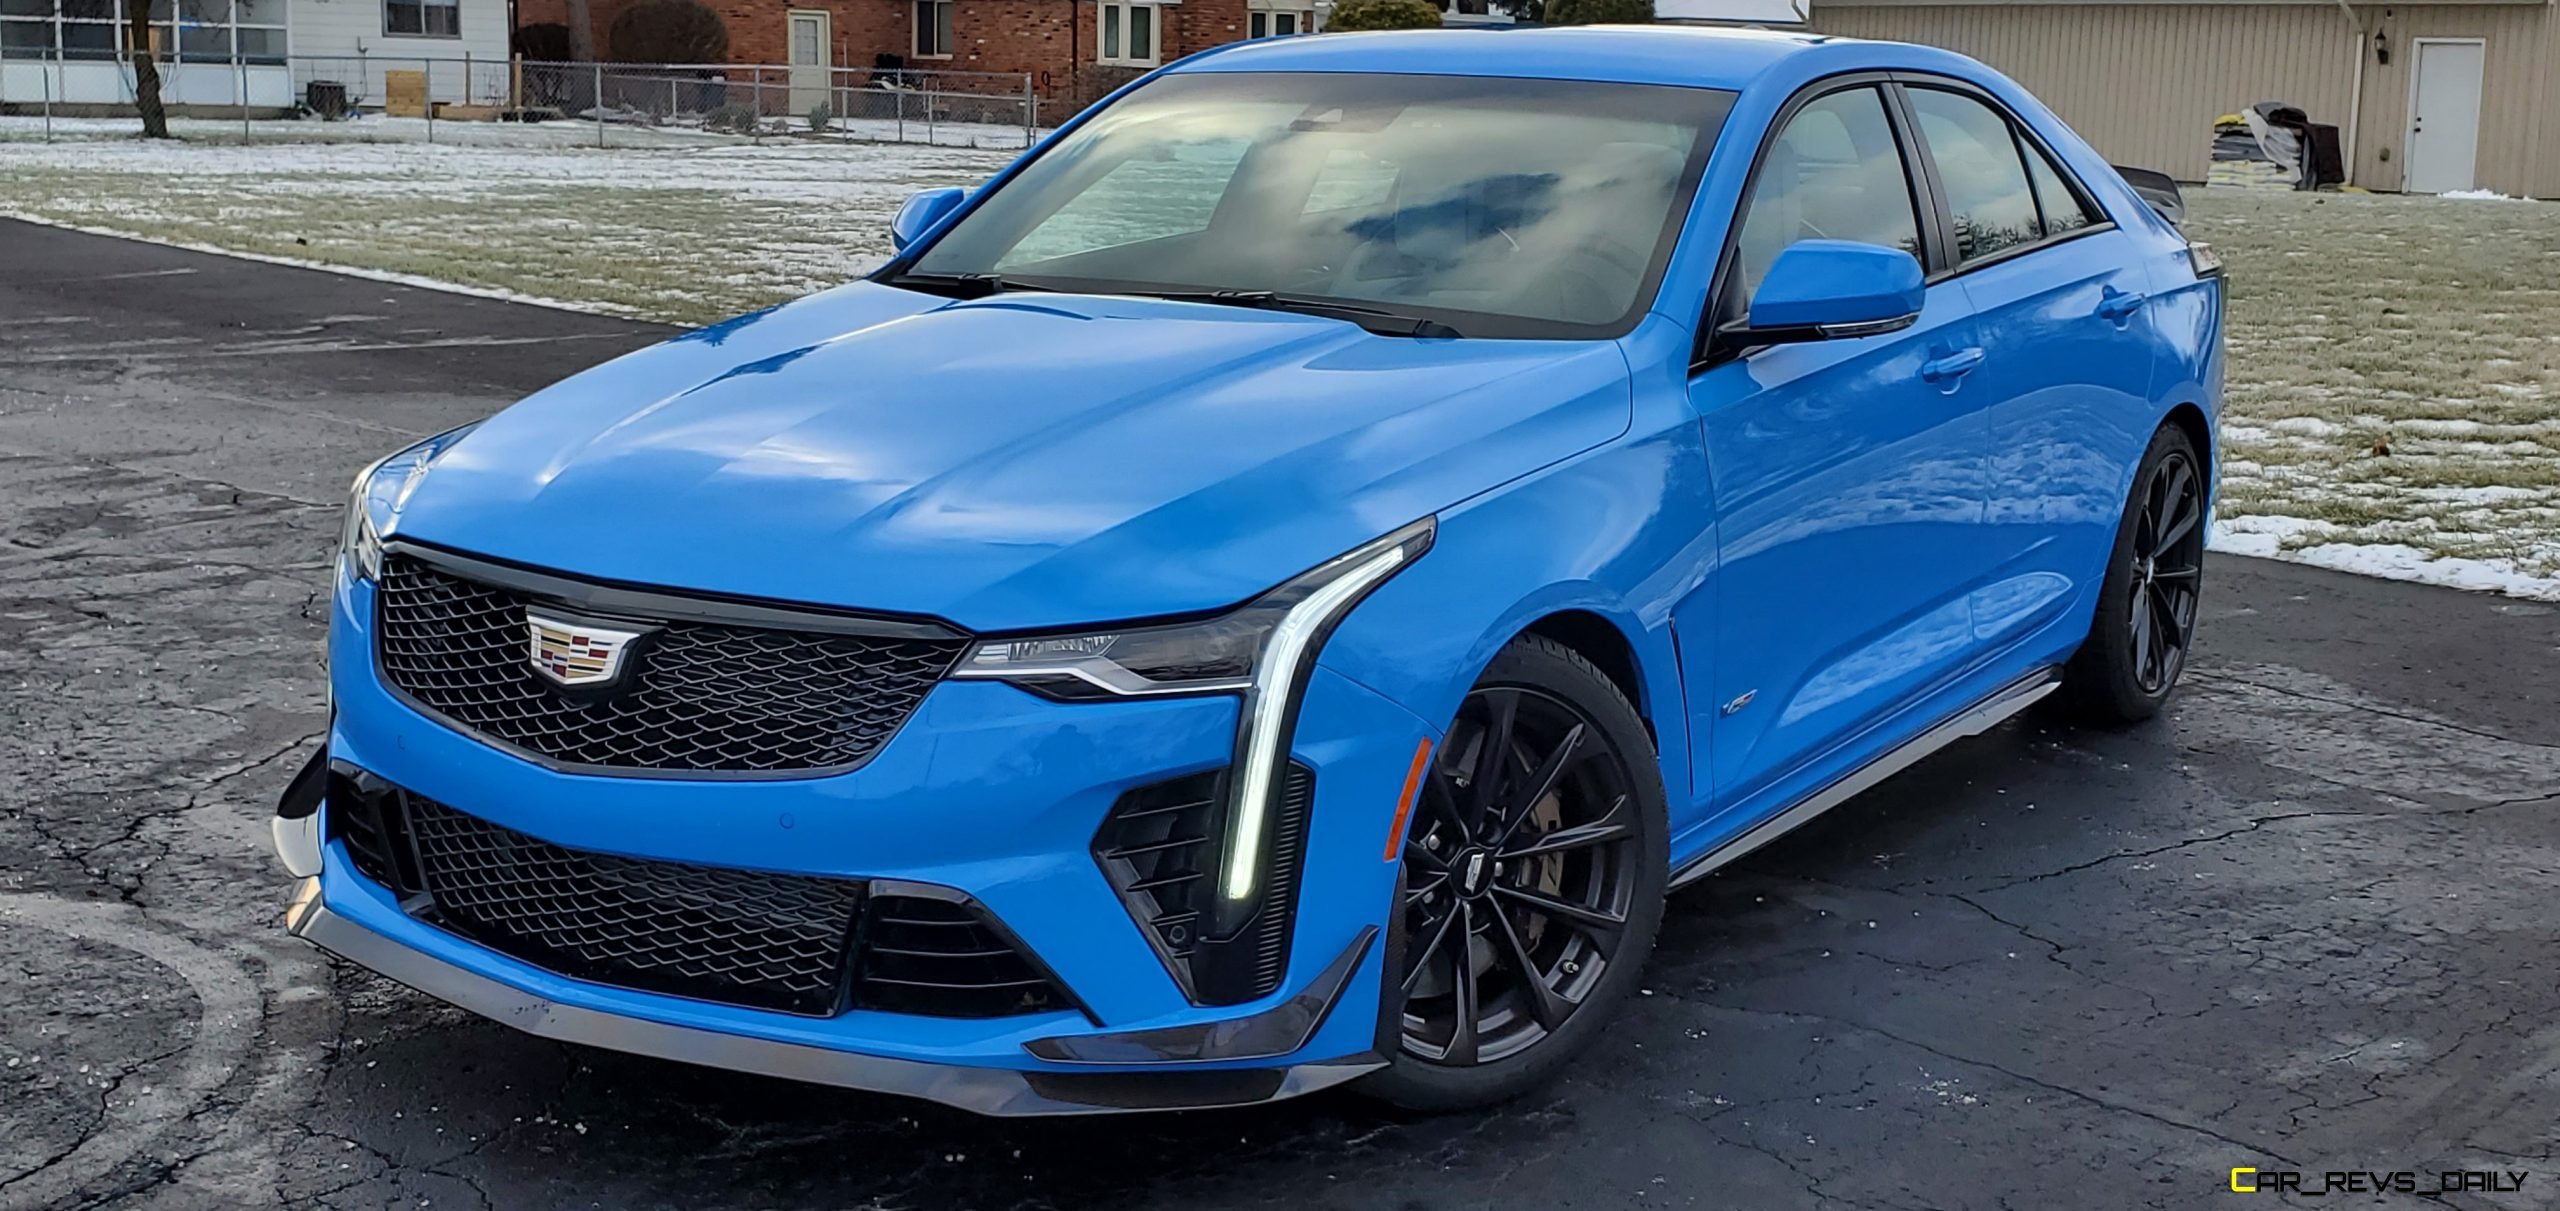 Road Test Review Cadillac CT4 V Blackwing Sedan Spreads Its Wings For Maximum Performance LATEST NEWS Car Revs Daily.com